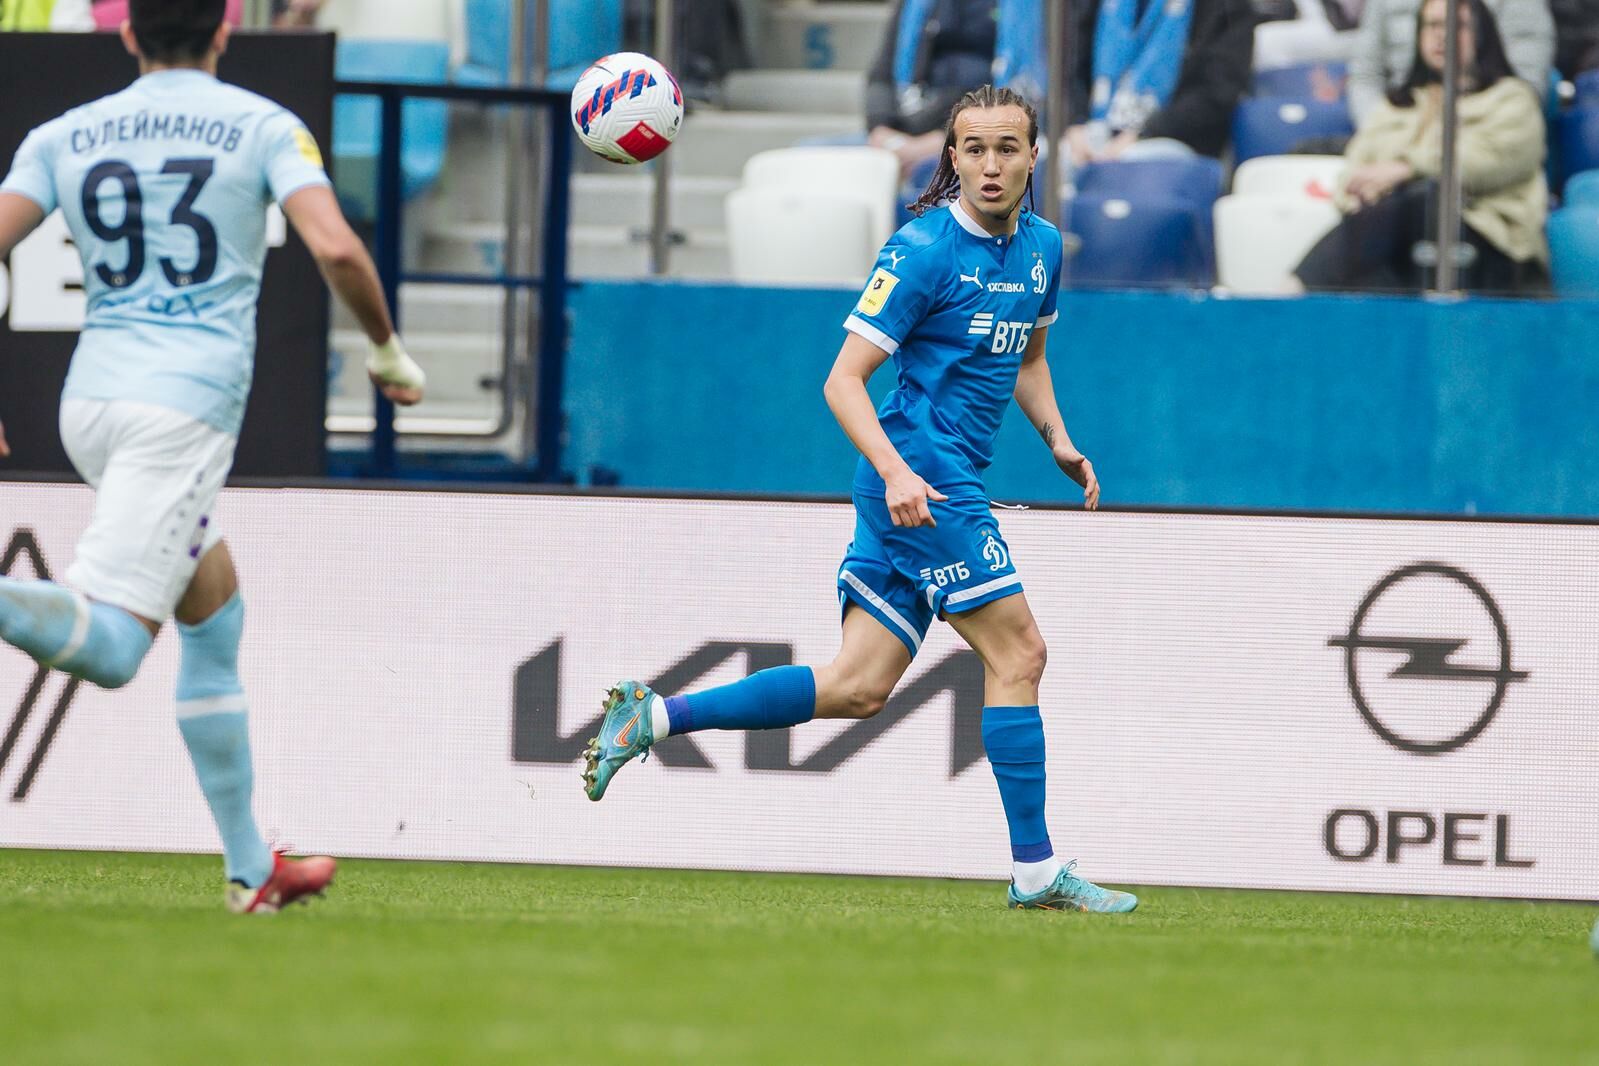 Diego Laxalt: When I went to RPL, I thought it would be easier here